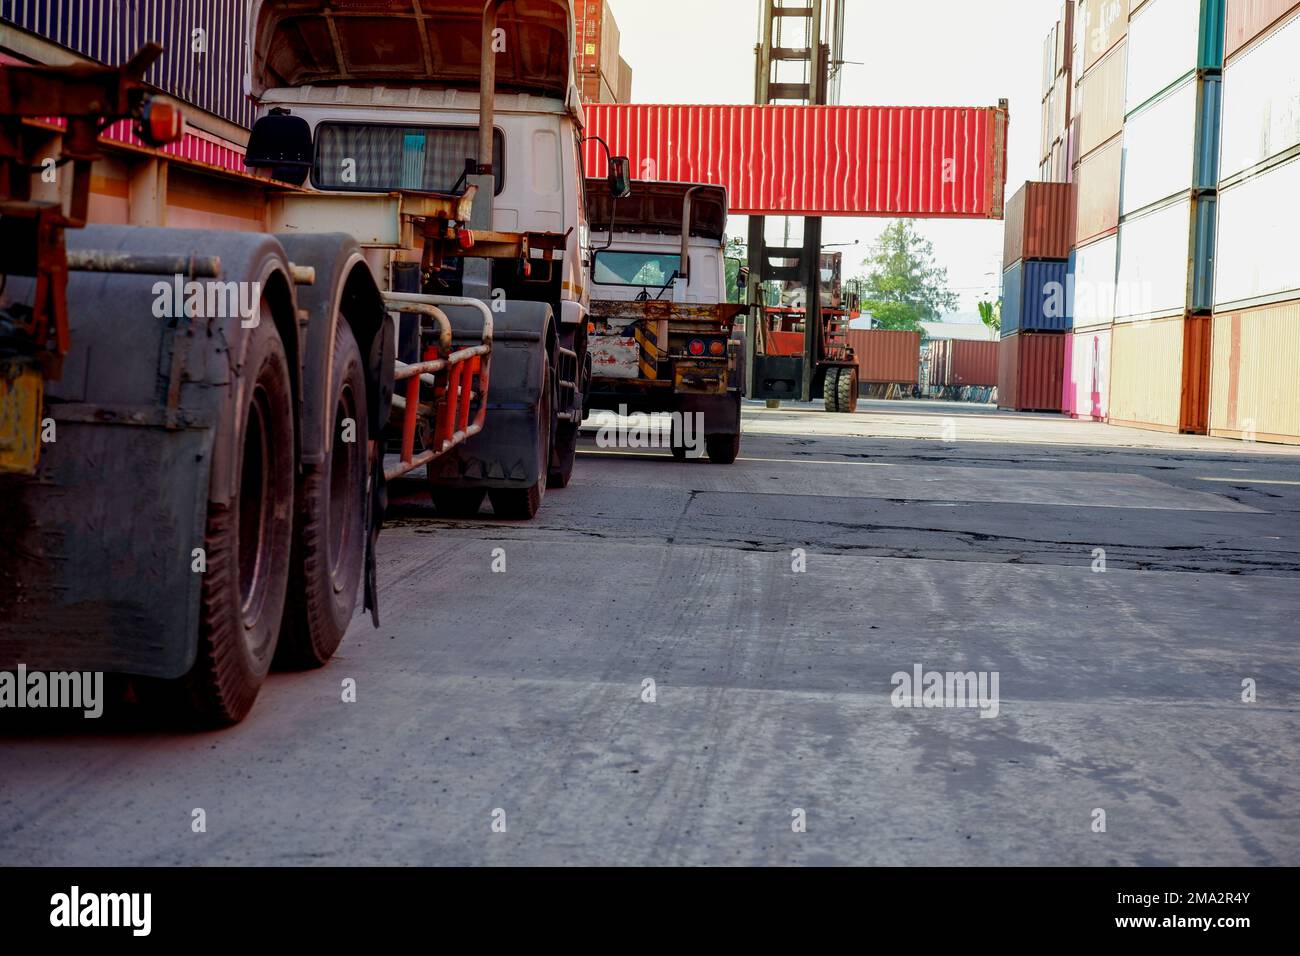 Trucks in the container depot Focus on imports and exports Stock Photo